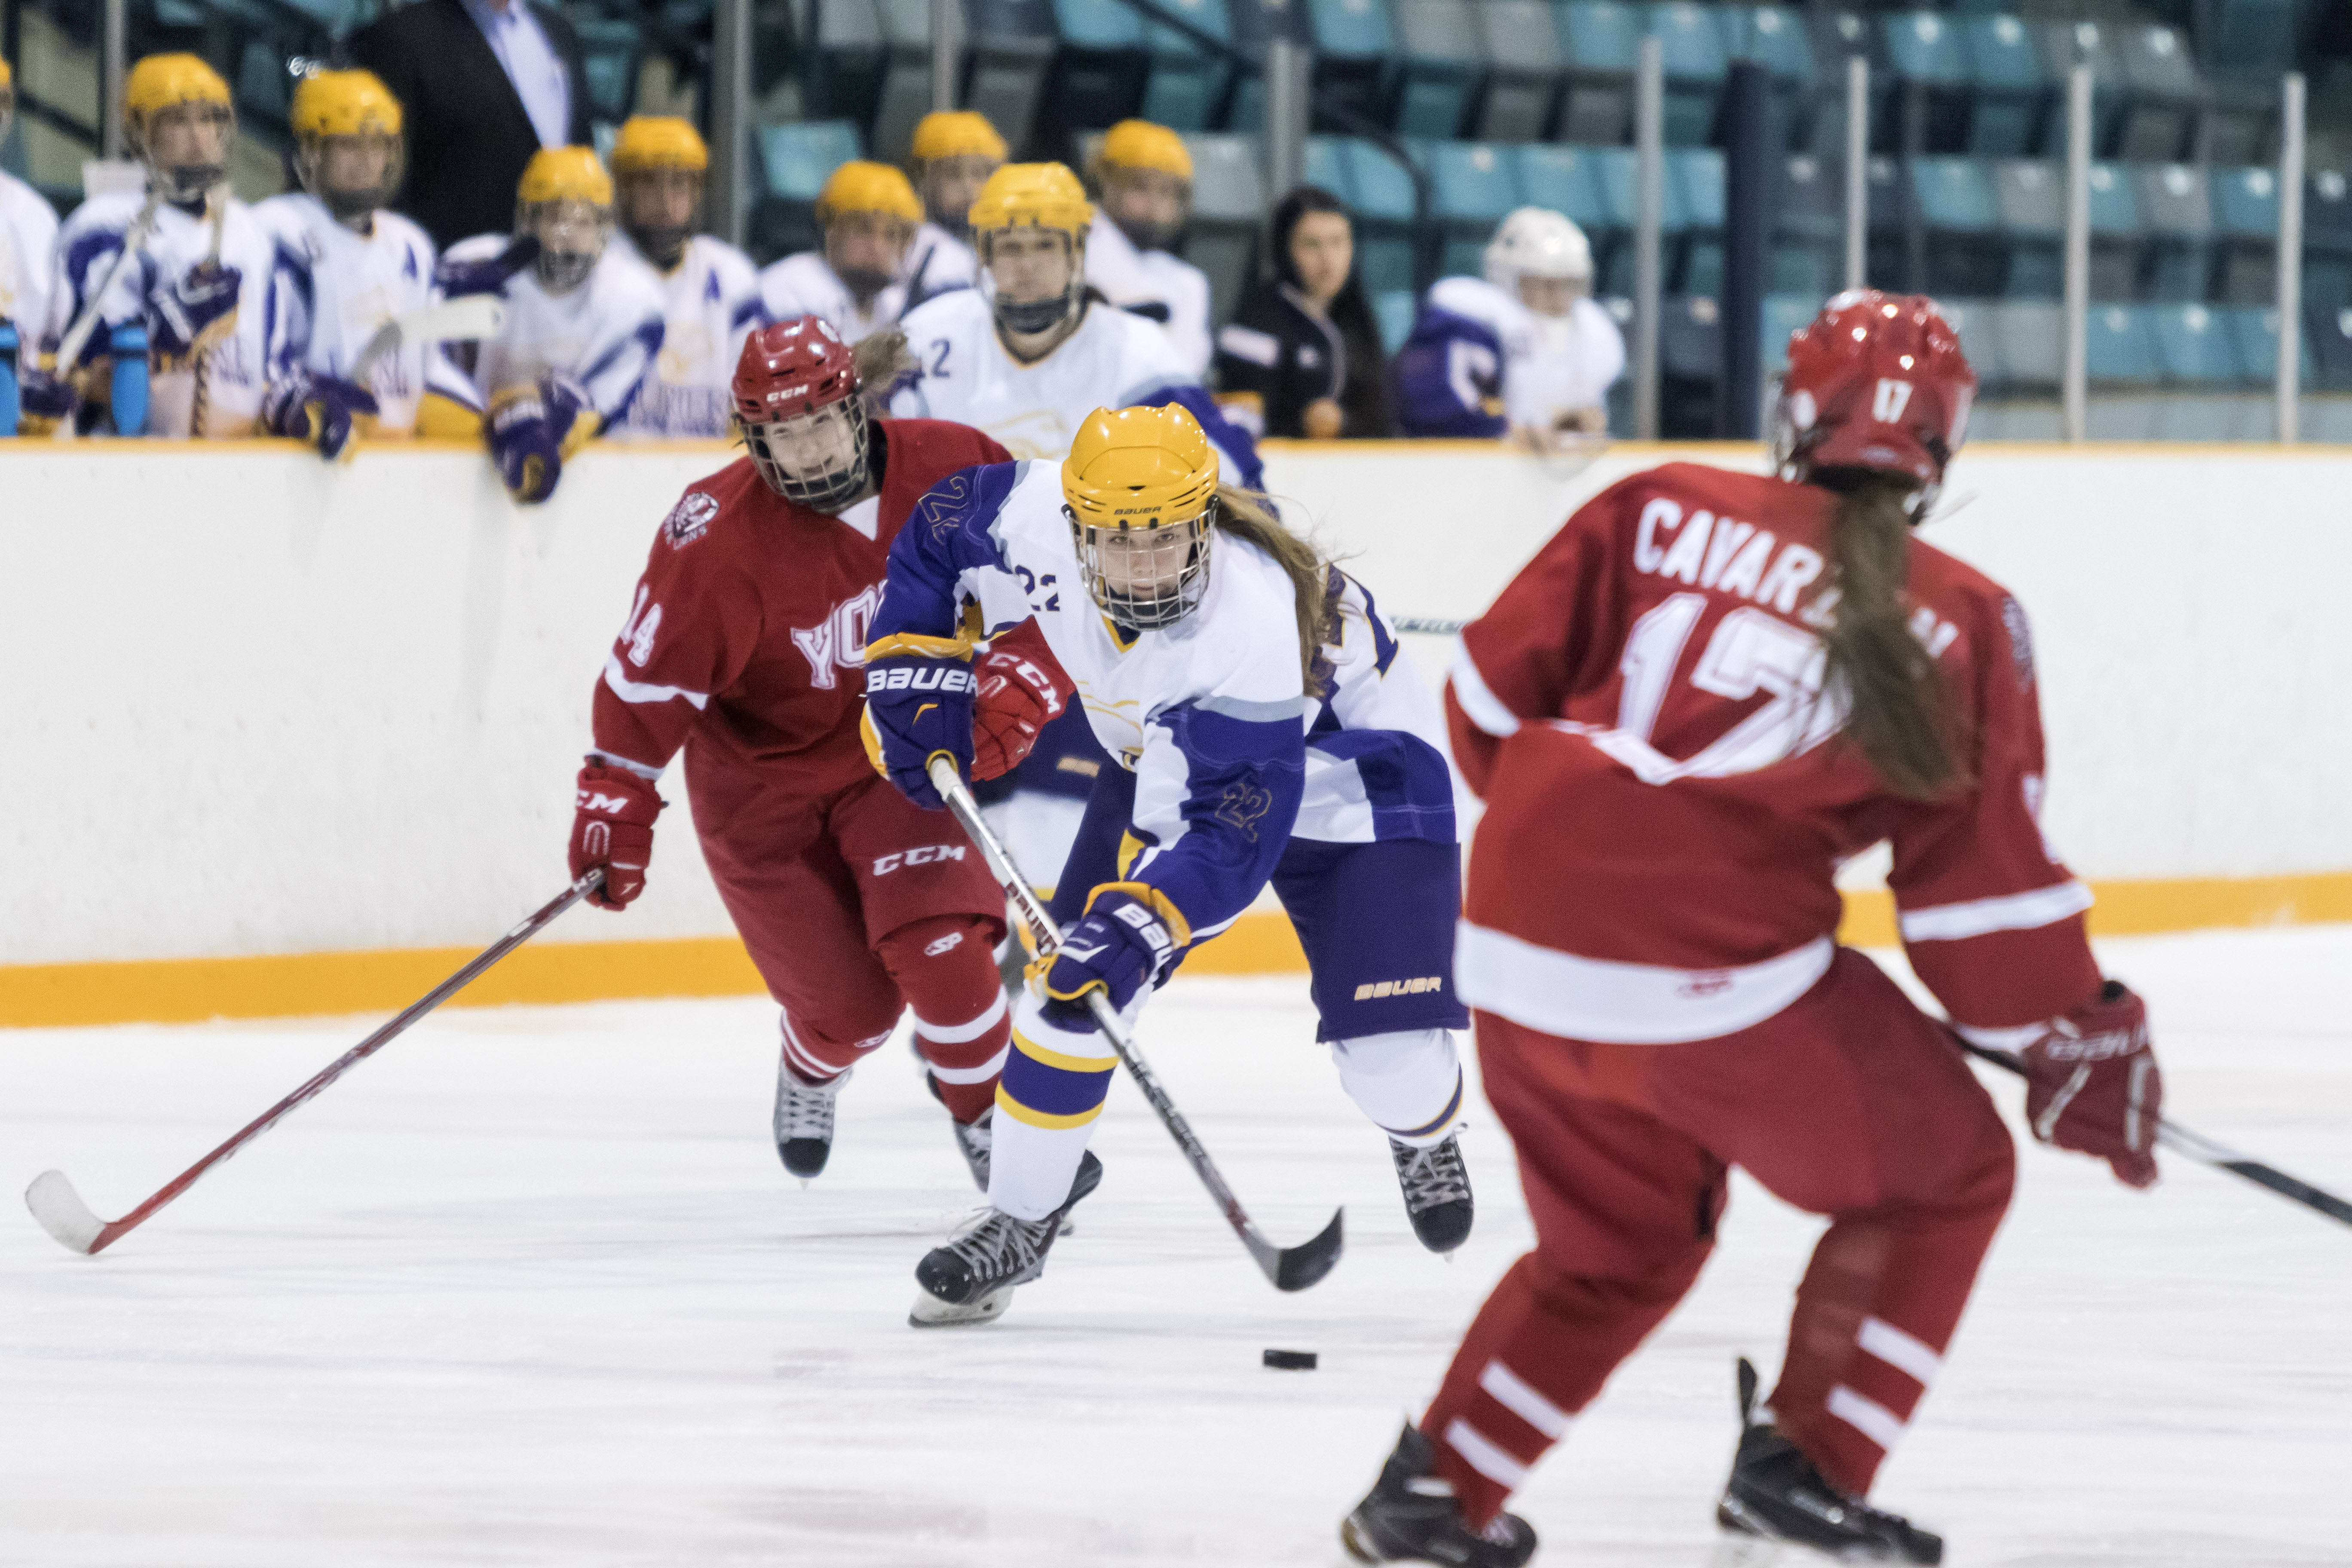 With a 5-1 win over the York Lions, the WLU women's hockey team got the scoring monkey off their backs 